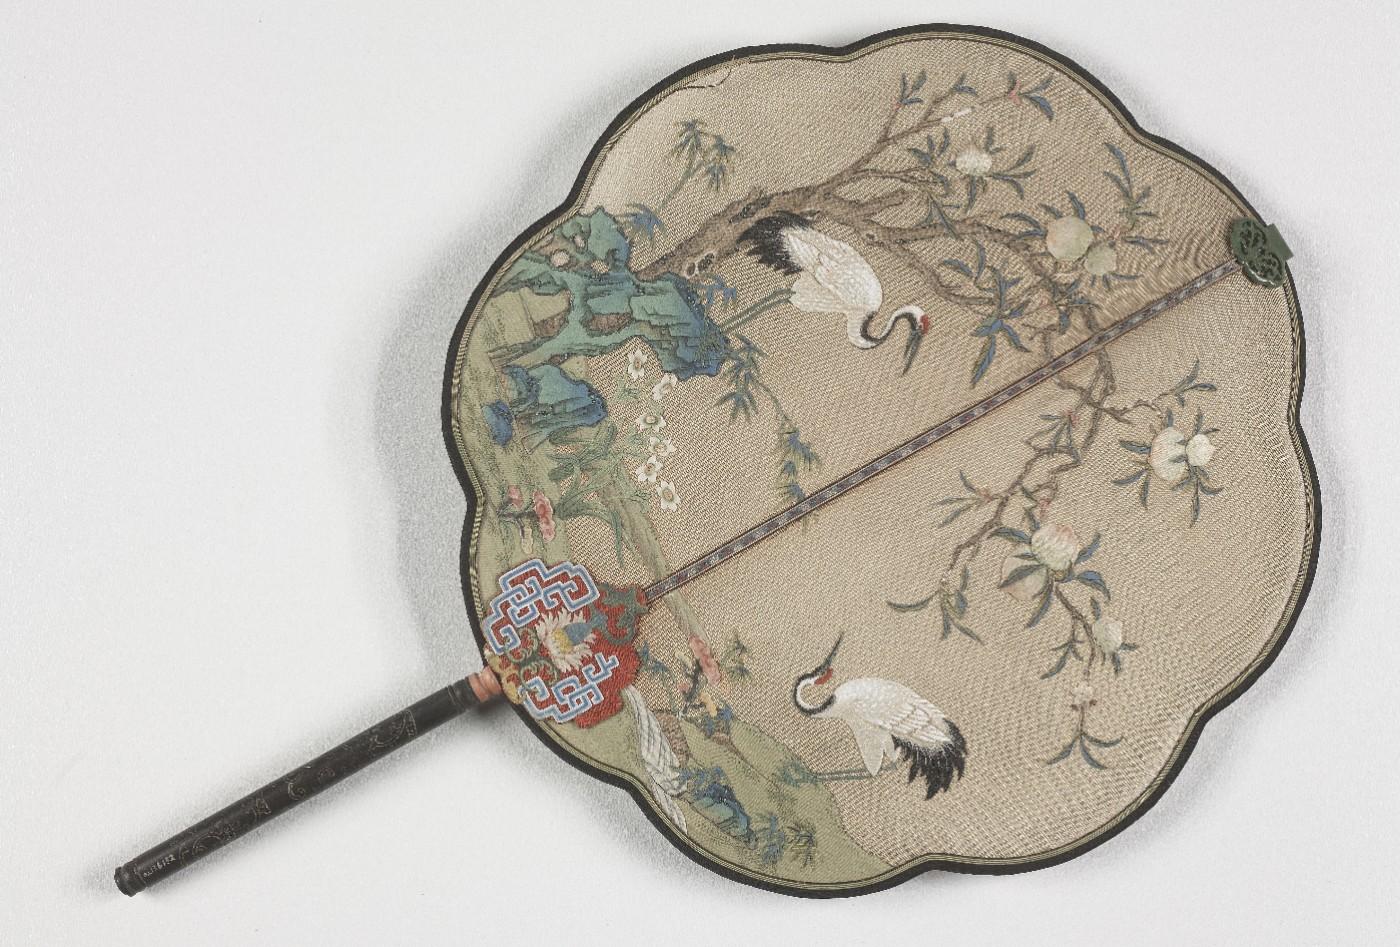 Lobed fan with cranes, peaches, and rocks